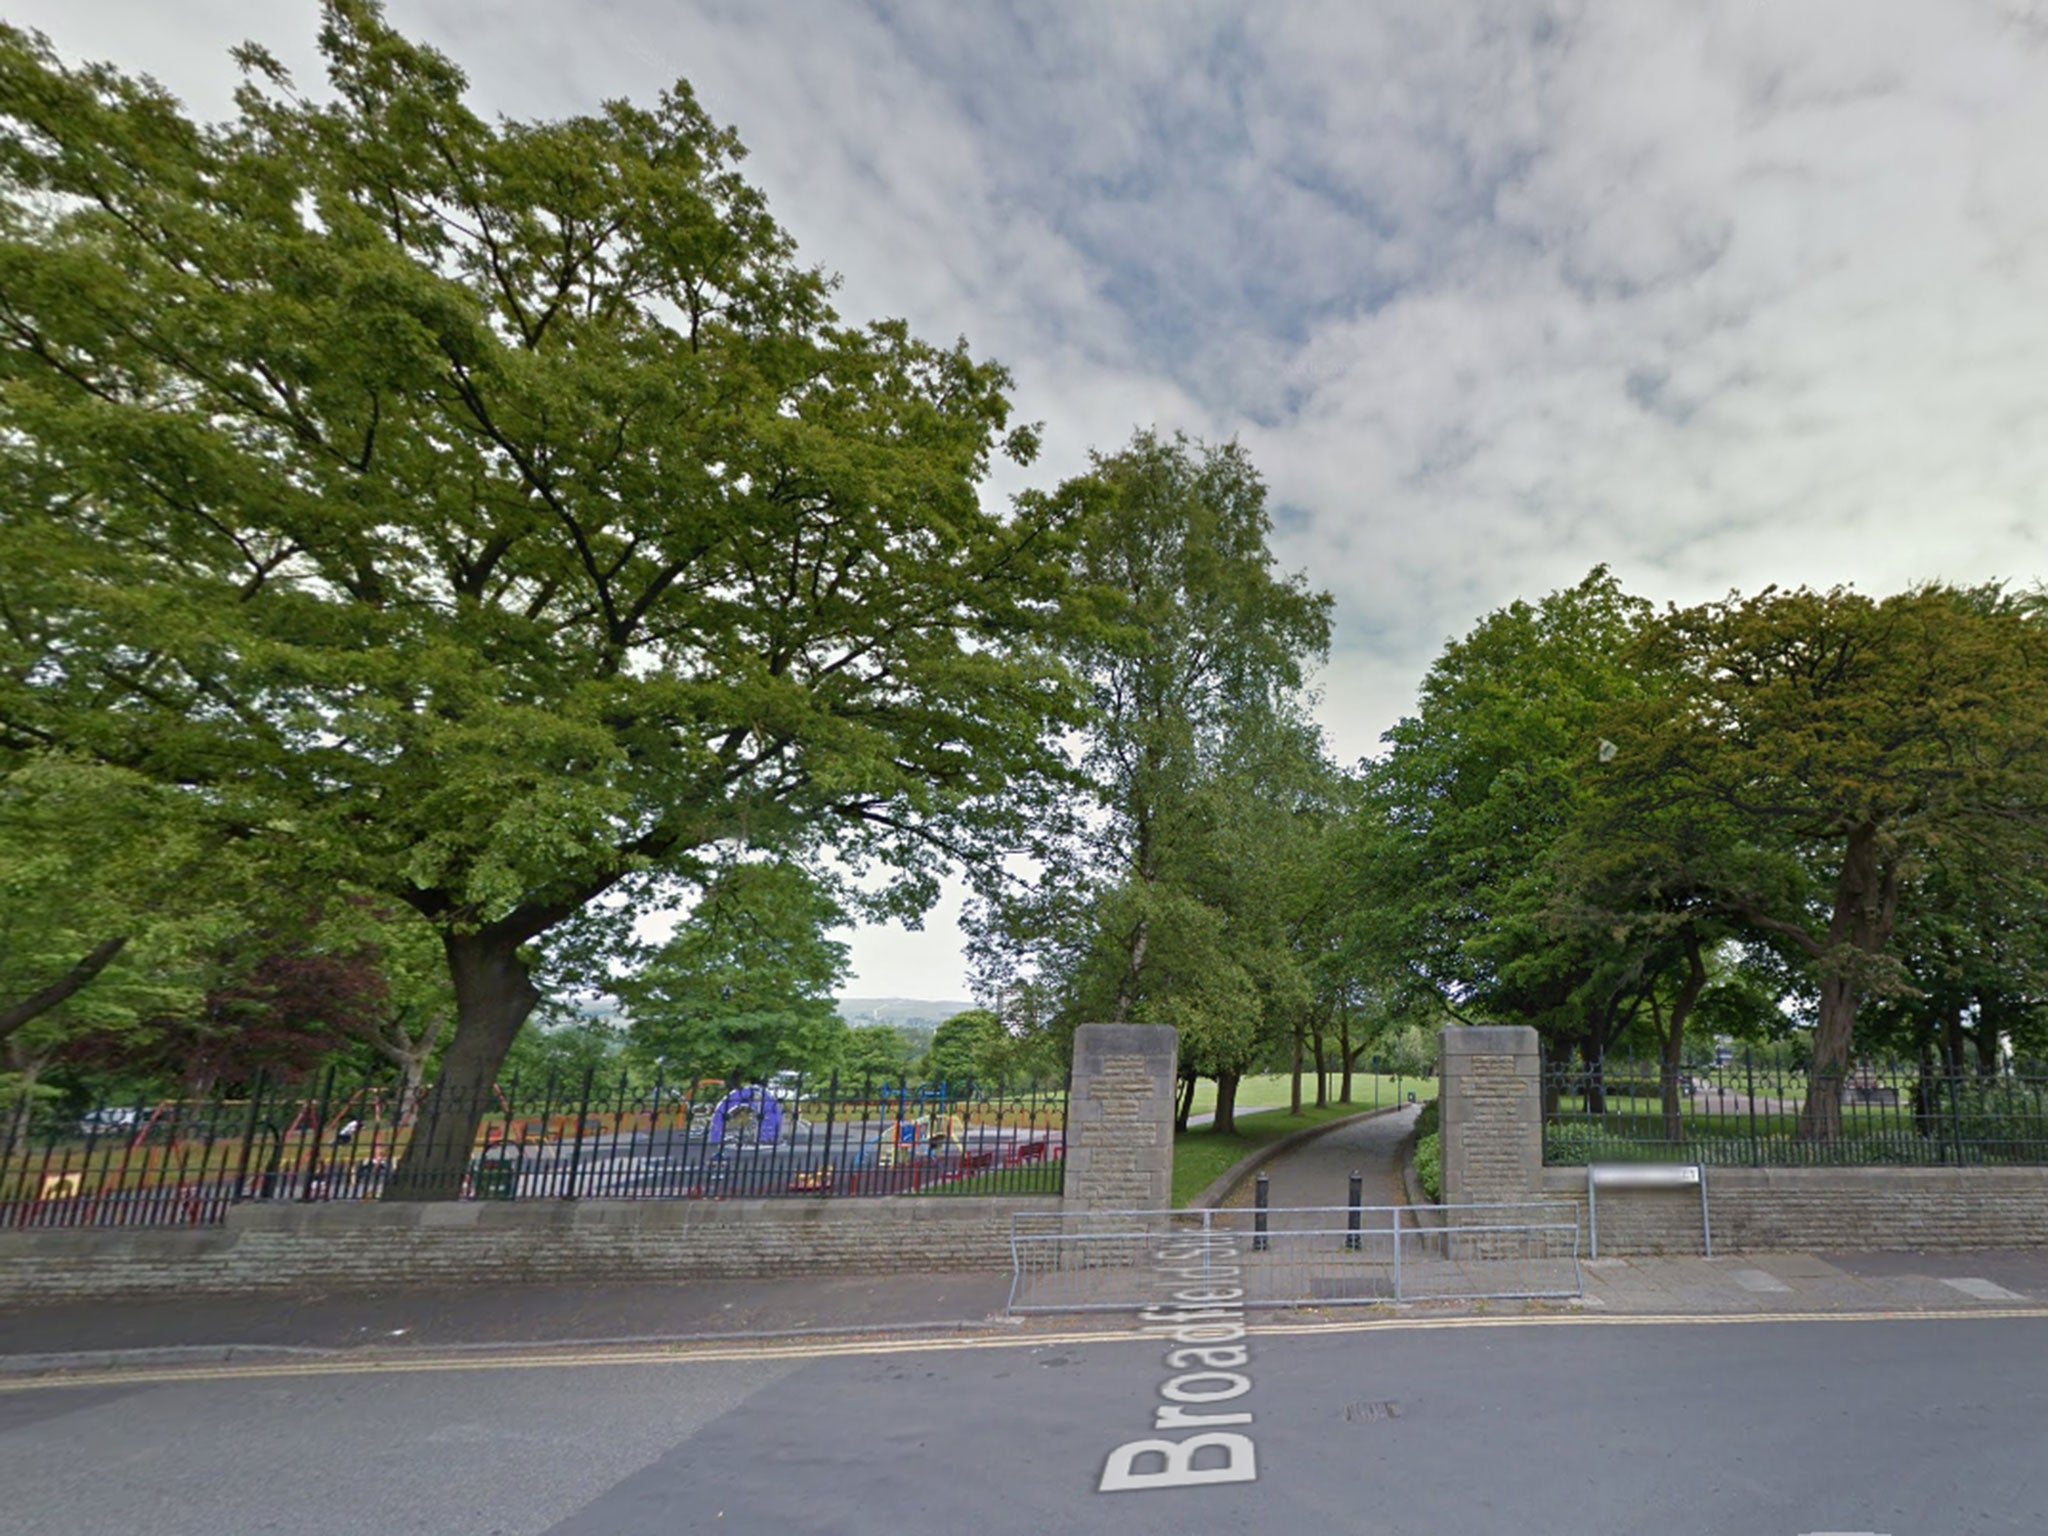 The attack allegedly took place in Broadfield Park, Greater Manchester